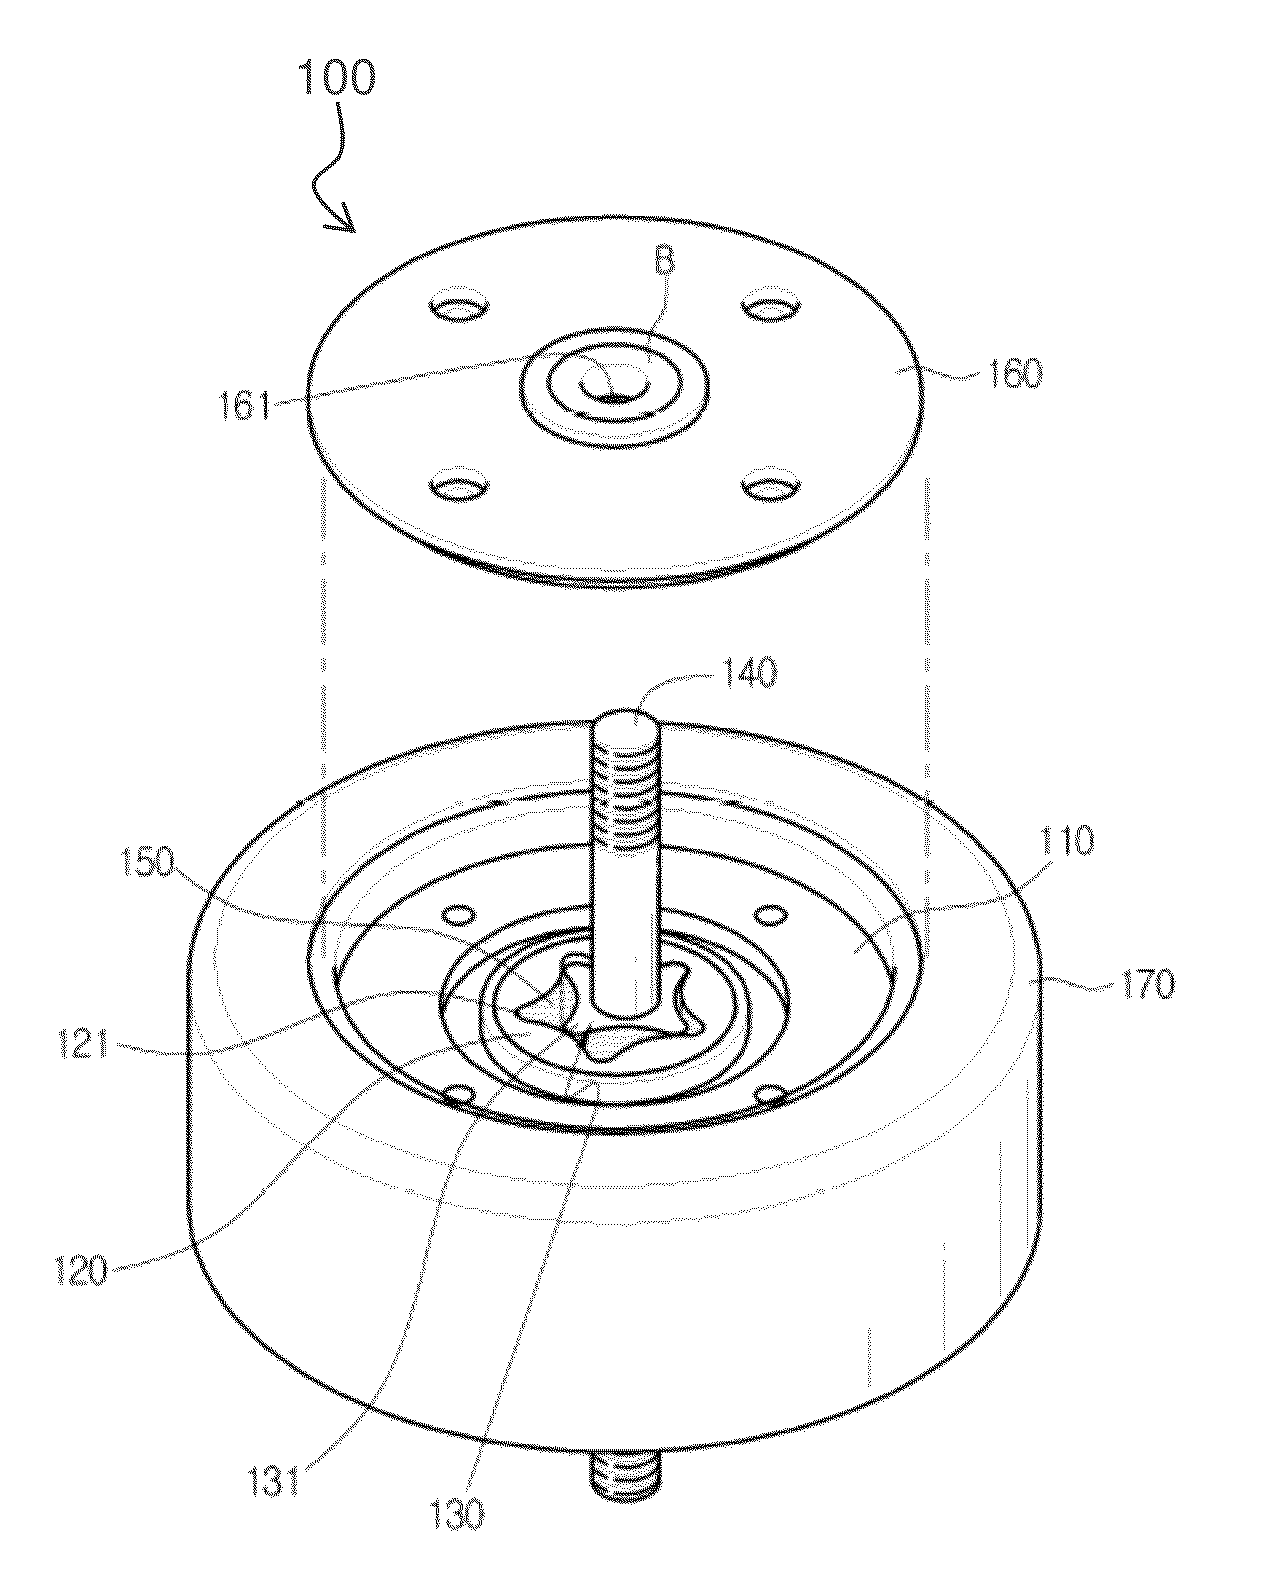 Active speed restricting wheel assembly